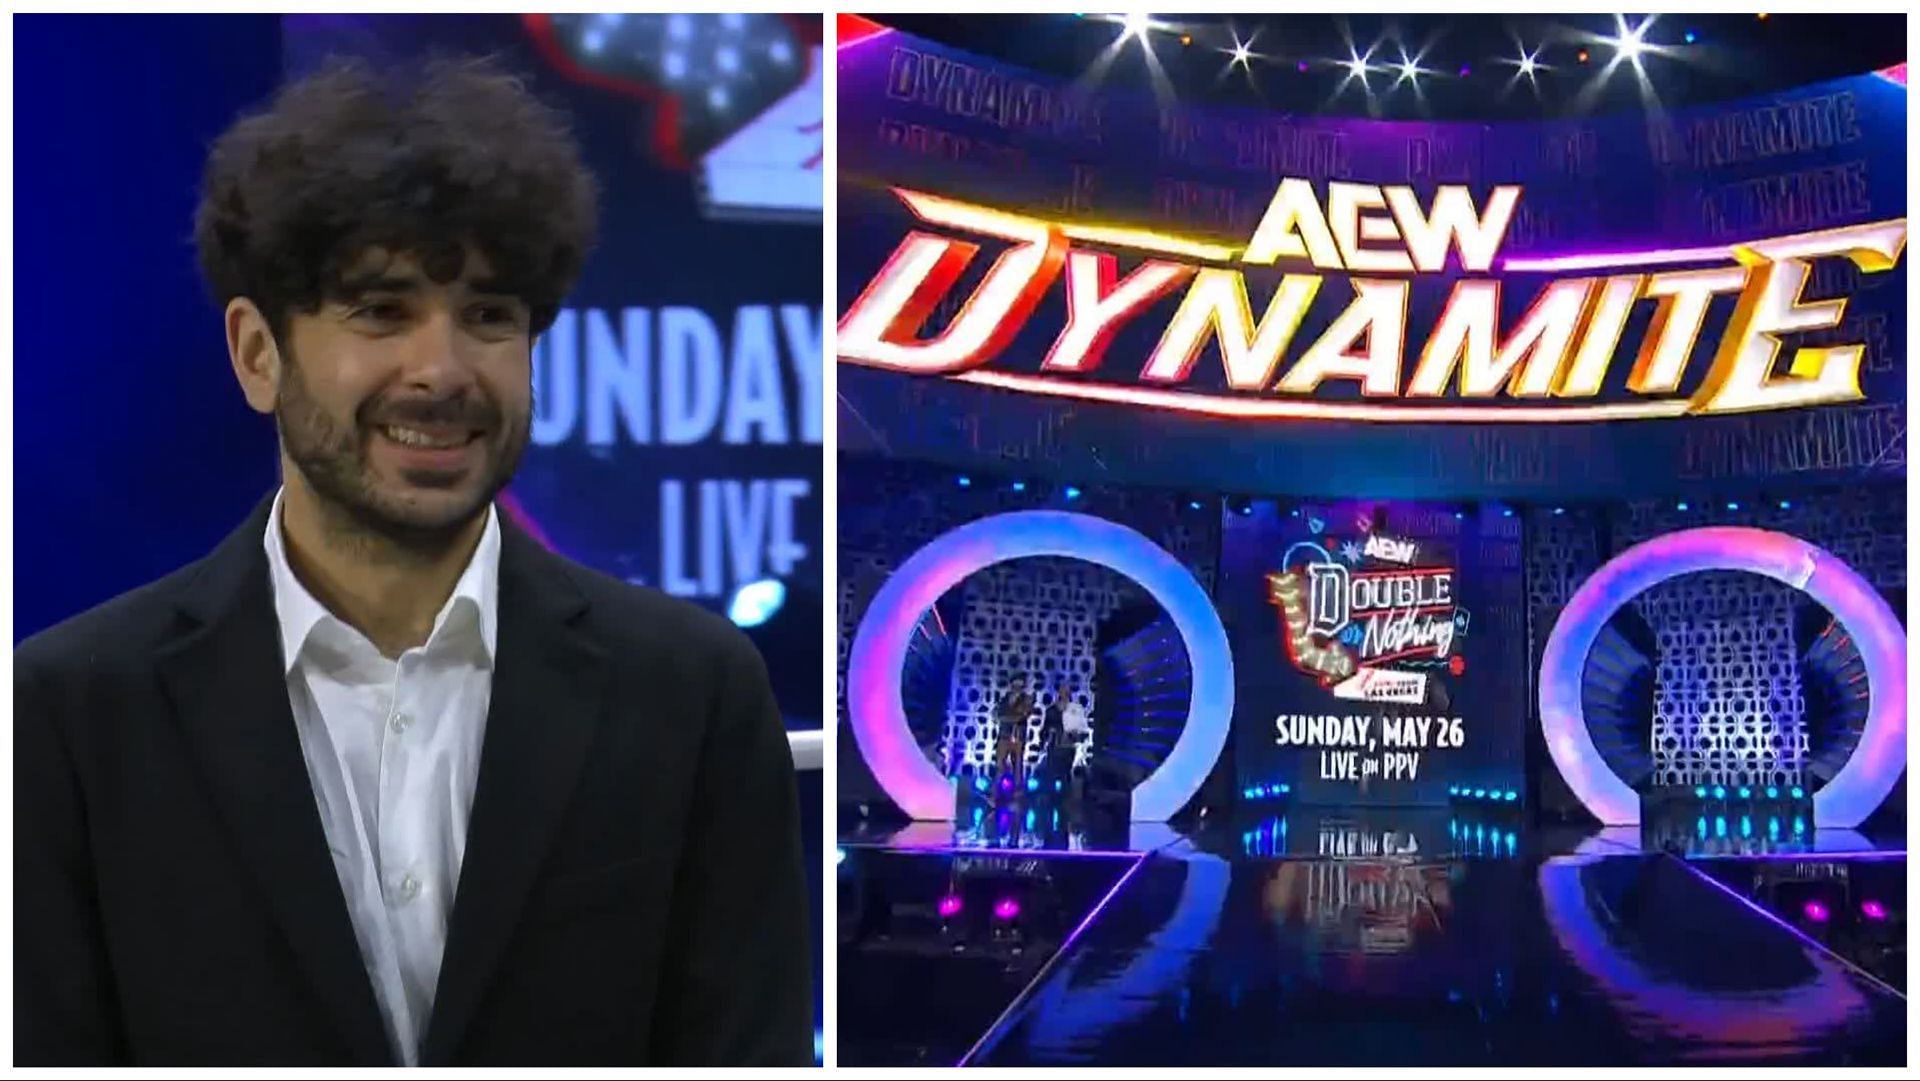 Tony Khan on AEW Dynamite, a look at the stage for Dynamite